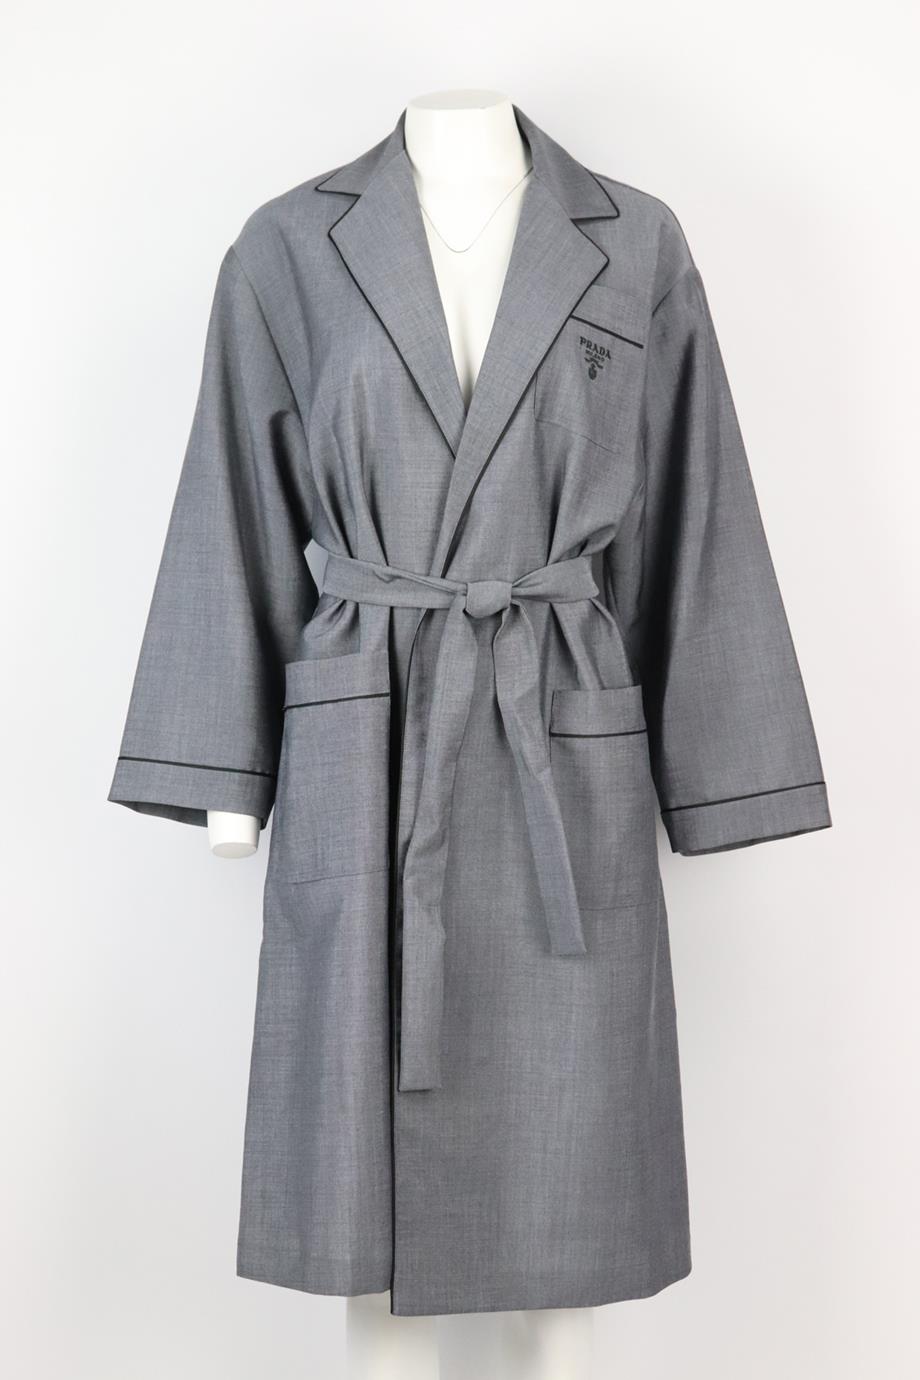 PRADA BELTED LOGO EMBROIDERED WOOL BLEND ROBE XSMALL